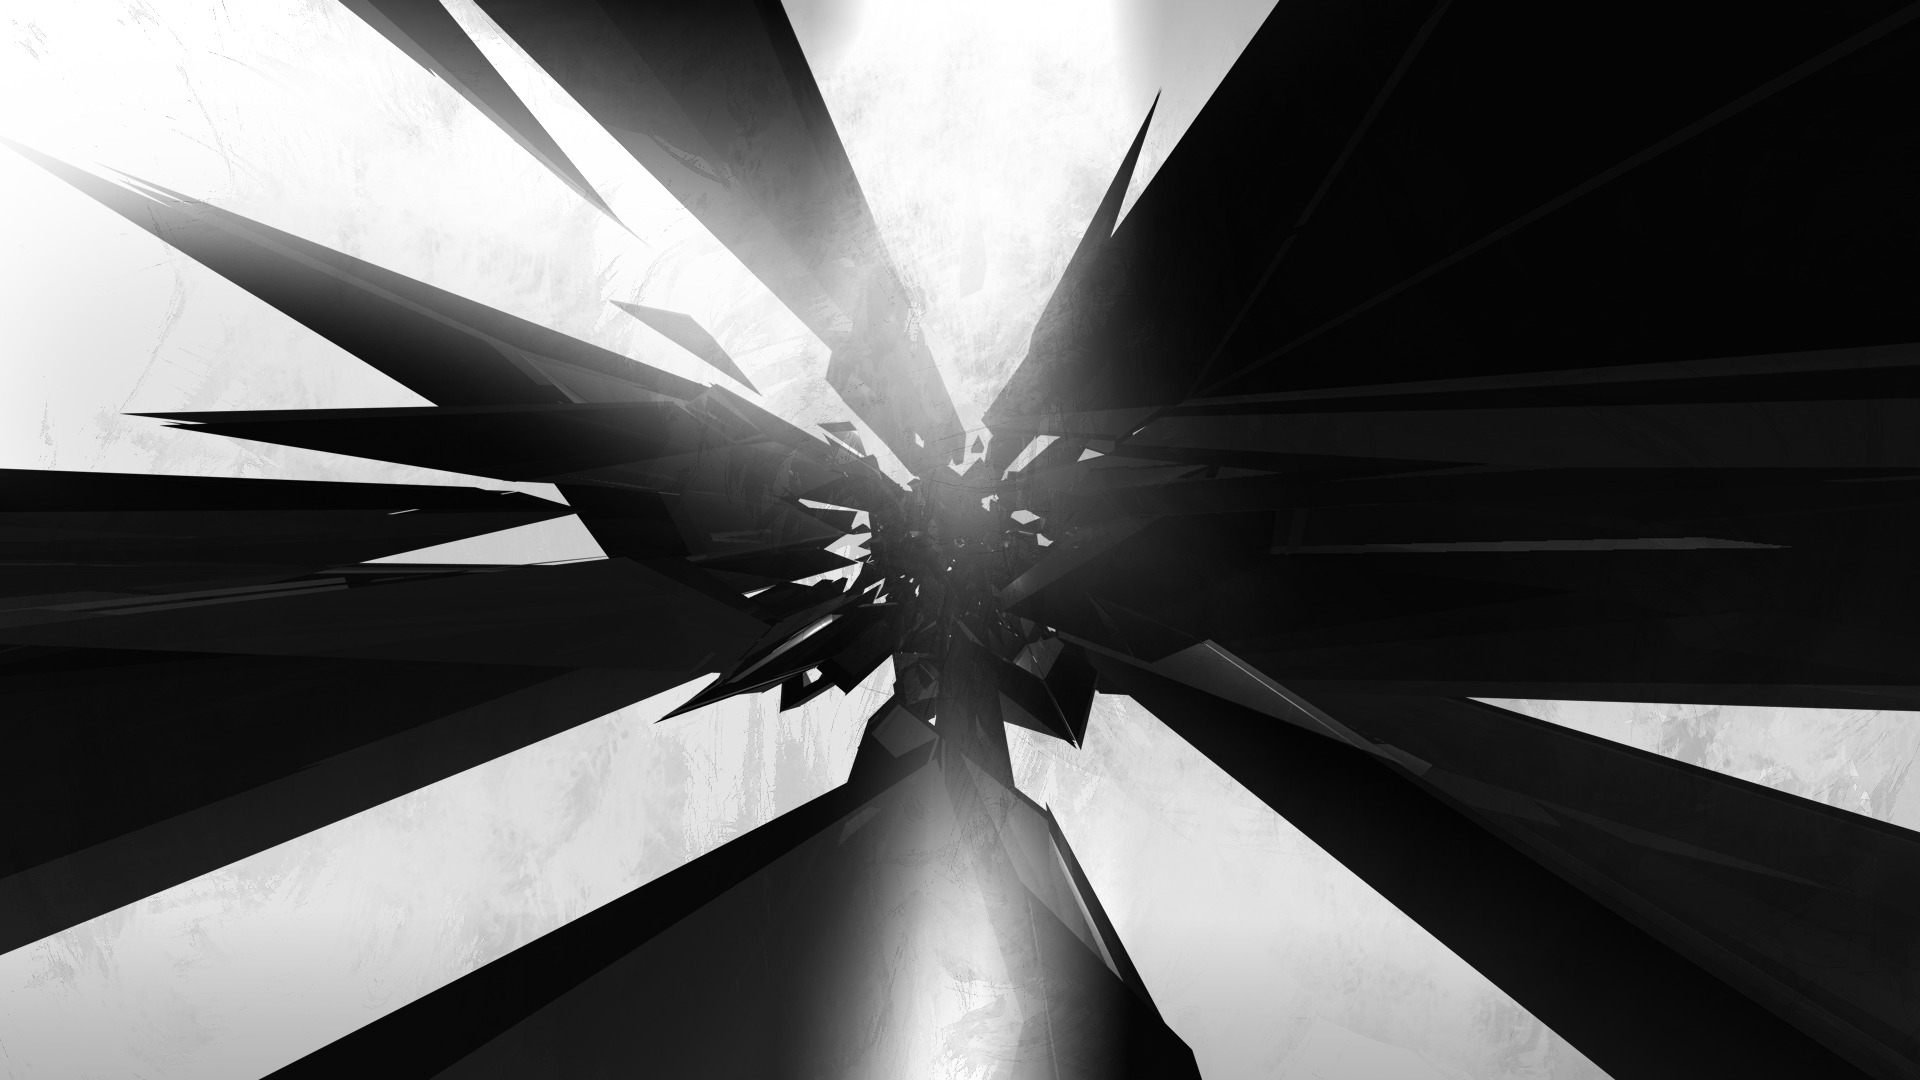 Another Black And White Abstract Wallpaper by TomSimo on